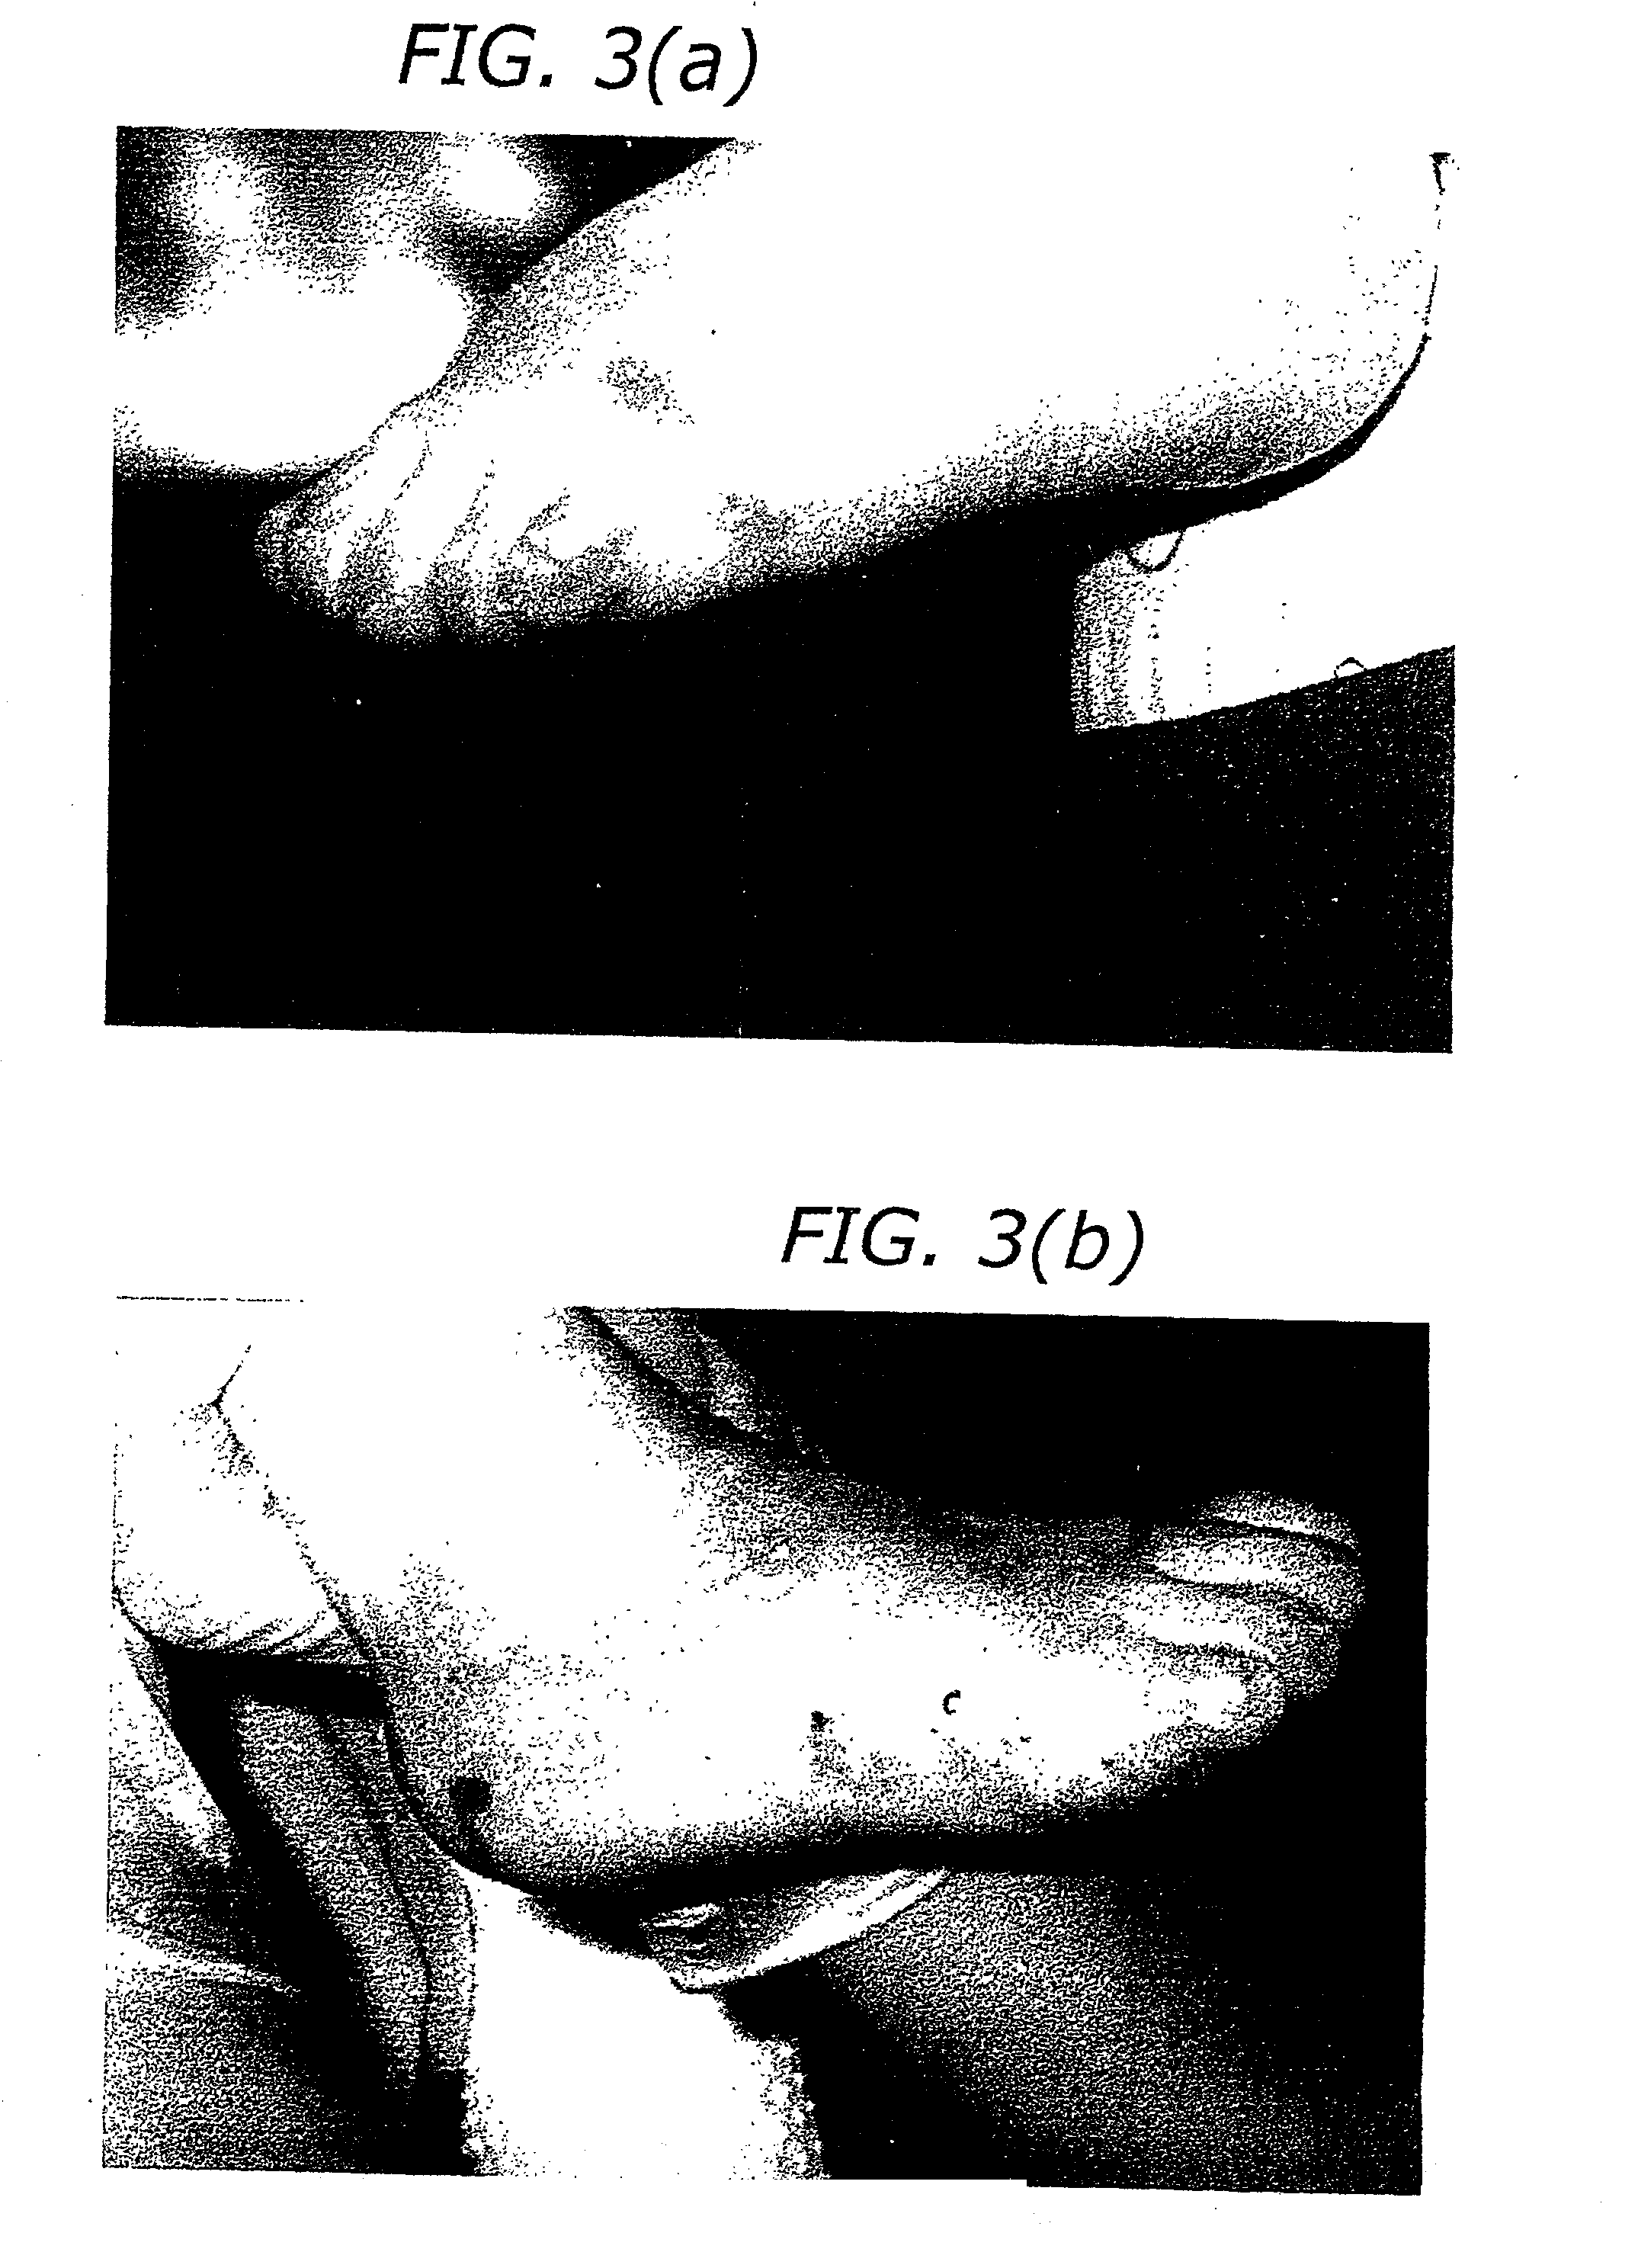 Methods for treatment of inflammatory diseases